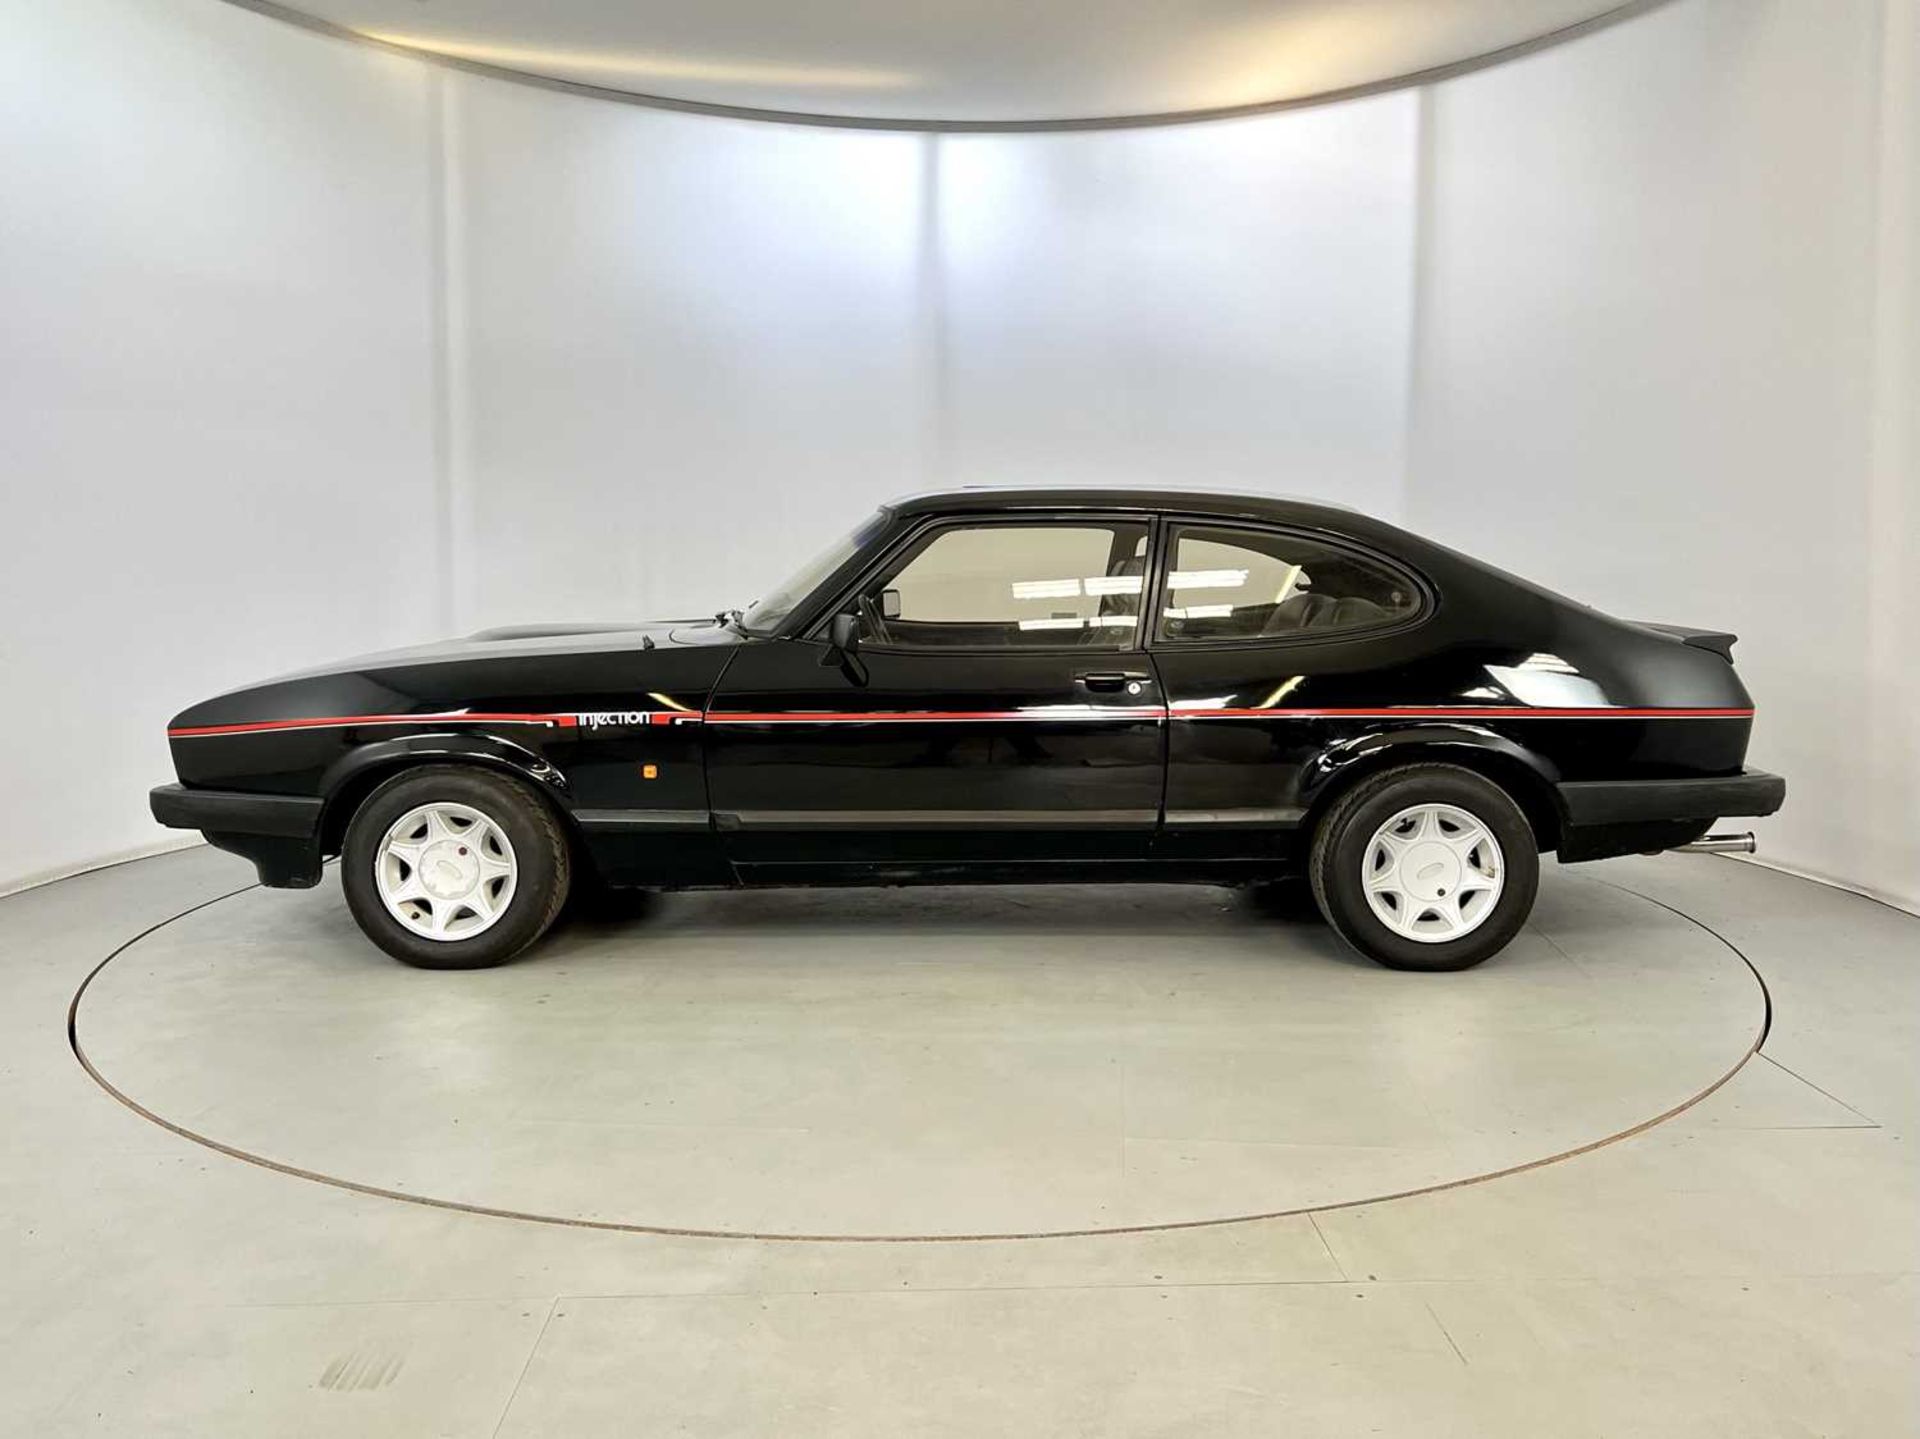 1987 Ford Capri 2.8 Injection - Image 5 of 28